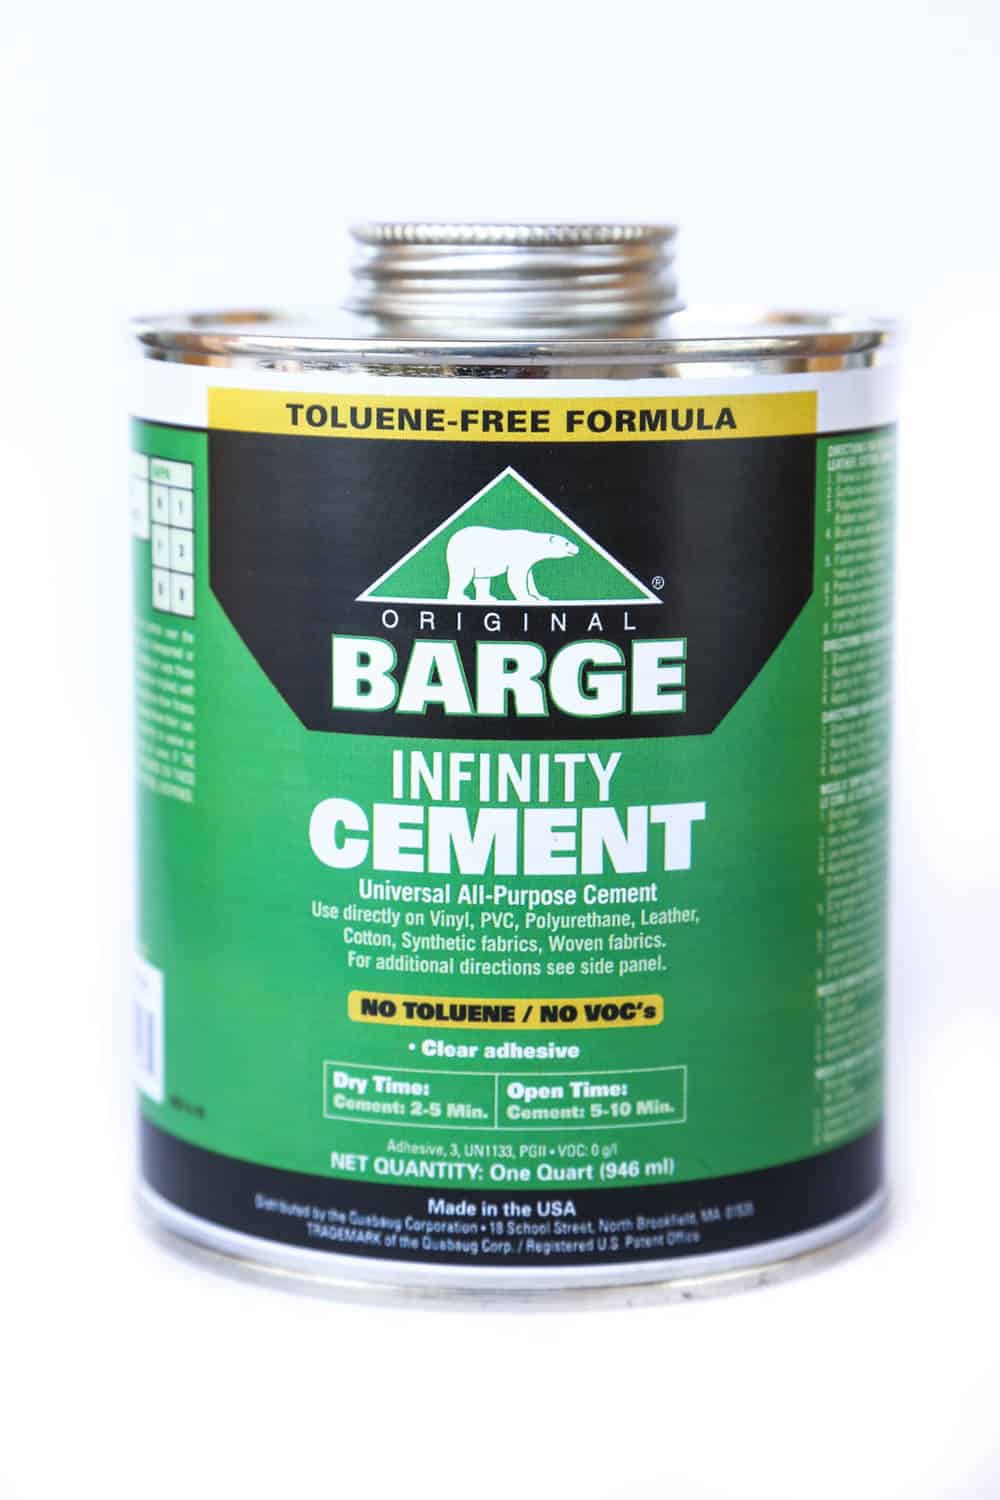 Barge infinity cement.jpeg